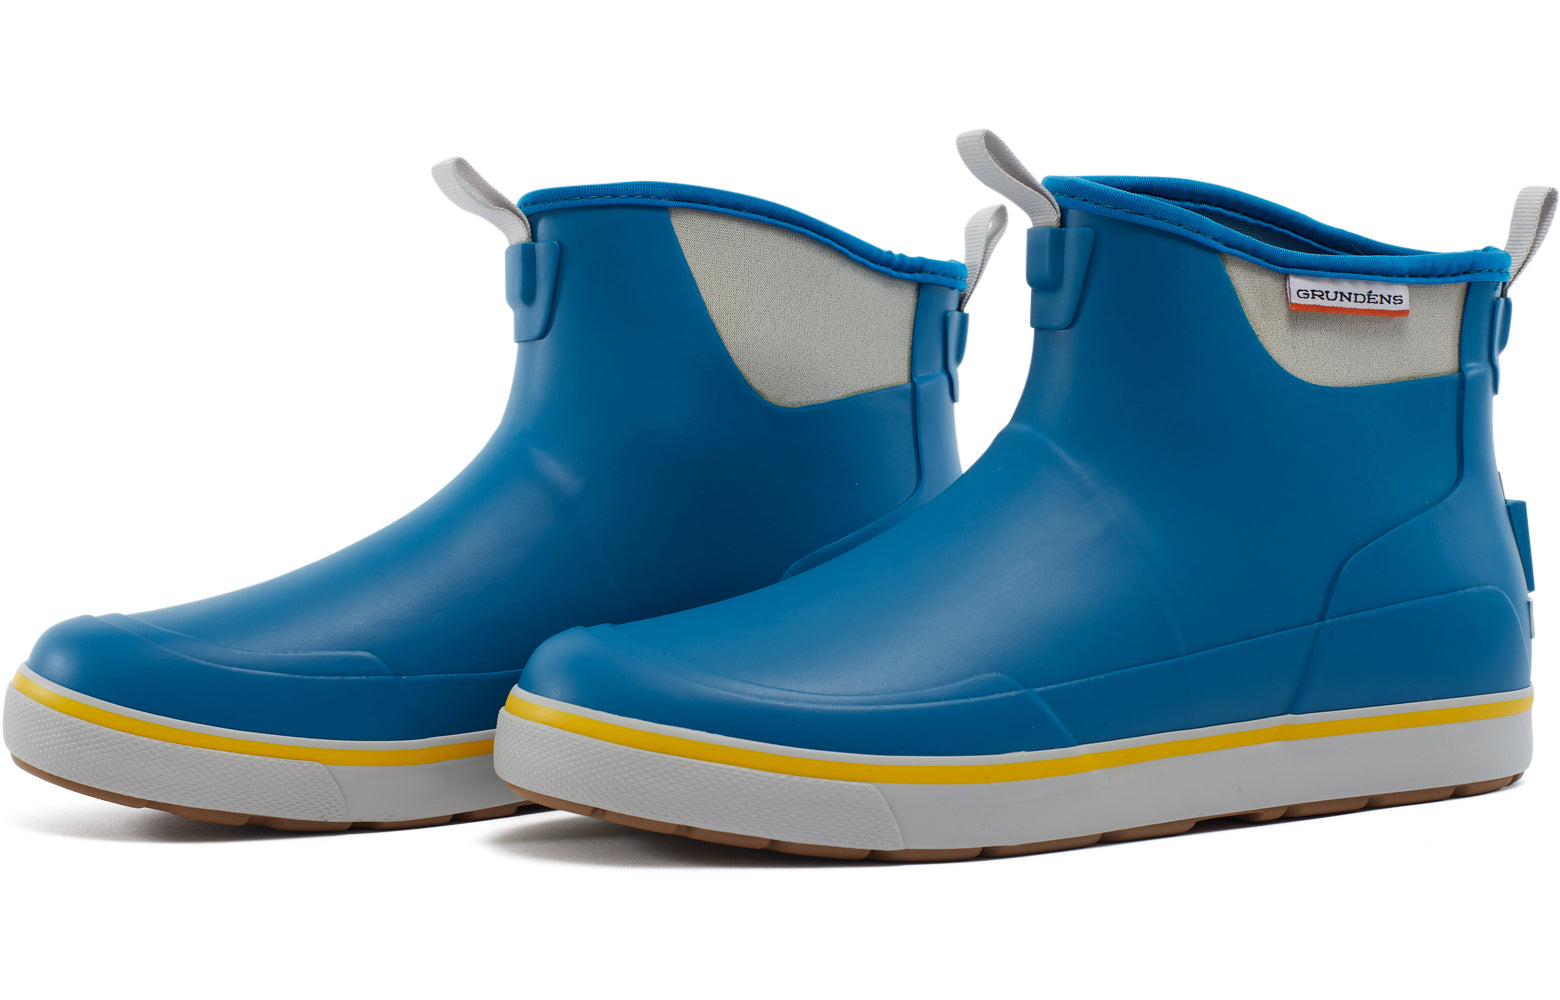 Deck-Boss Ankle Boot in Aegean color